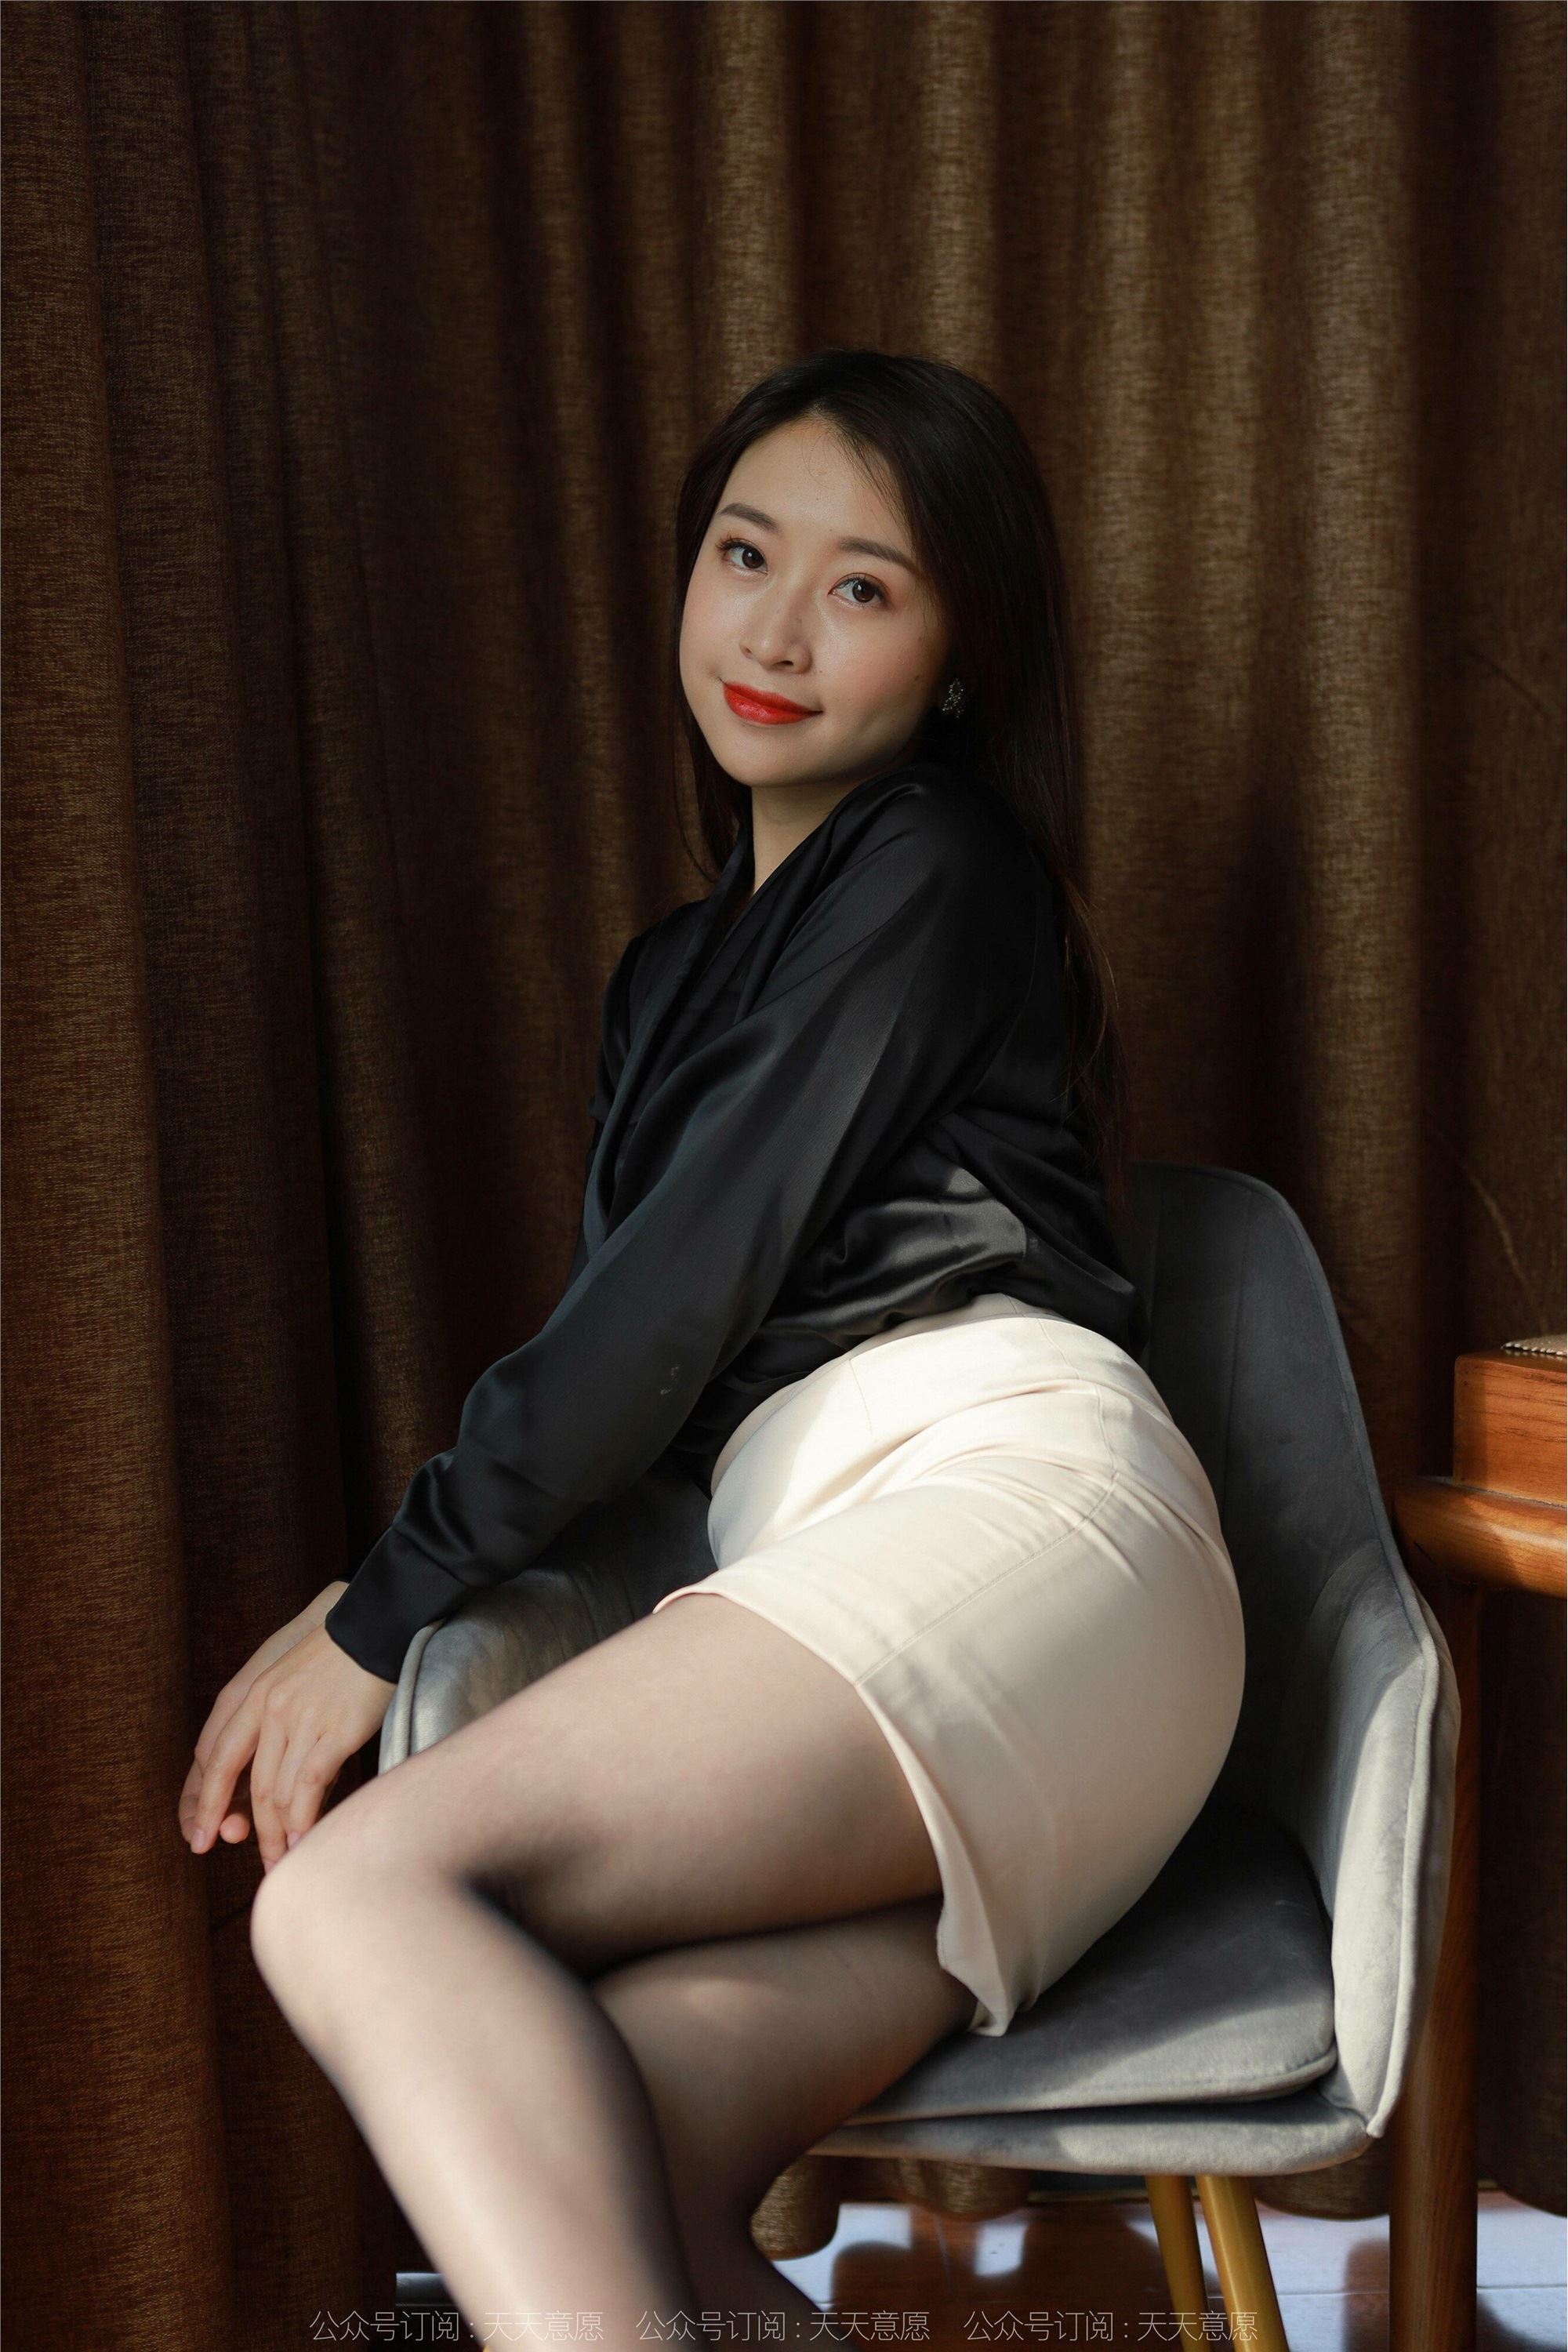 IESS Different thoughts Fun to 2022.02.04 Silk home 996: Black Silk Professional Dress by Xiaojie